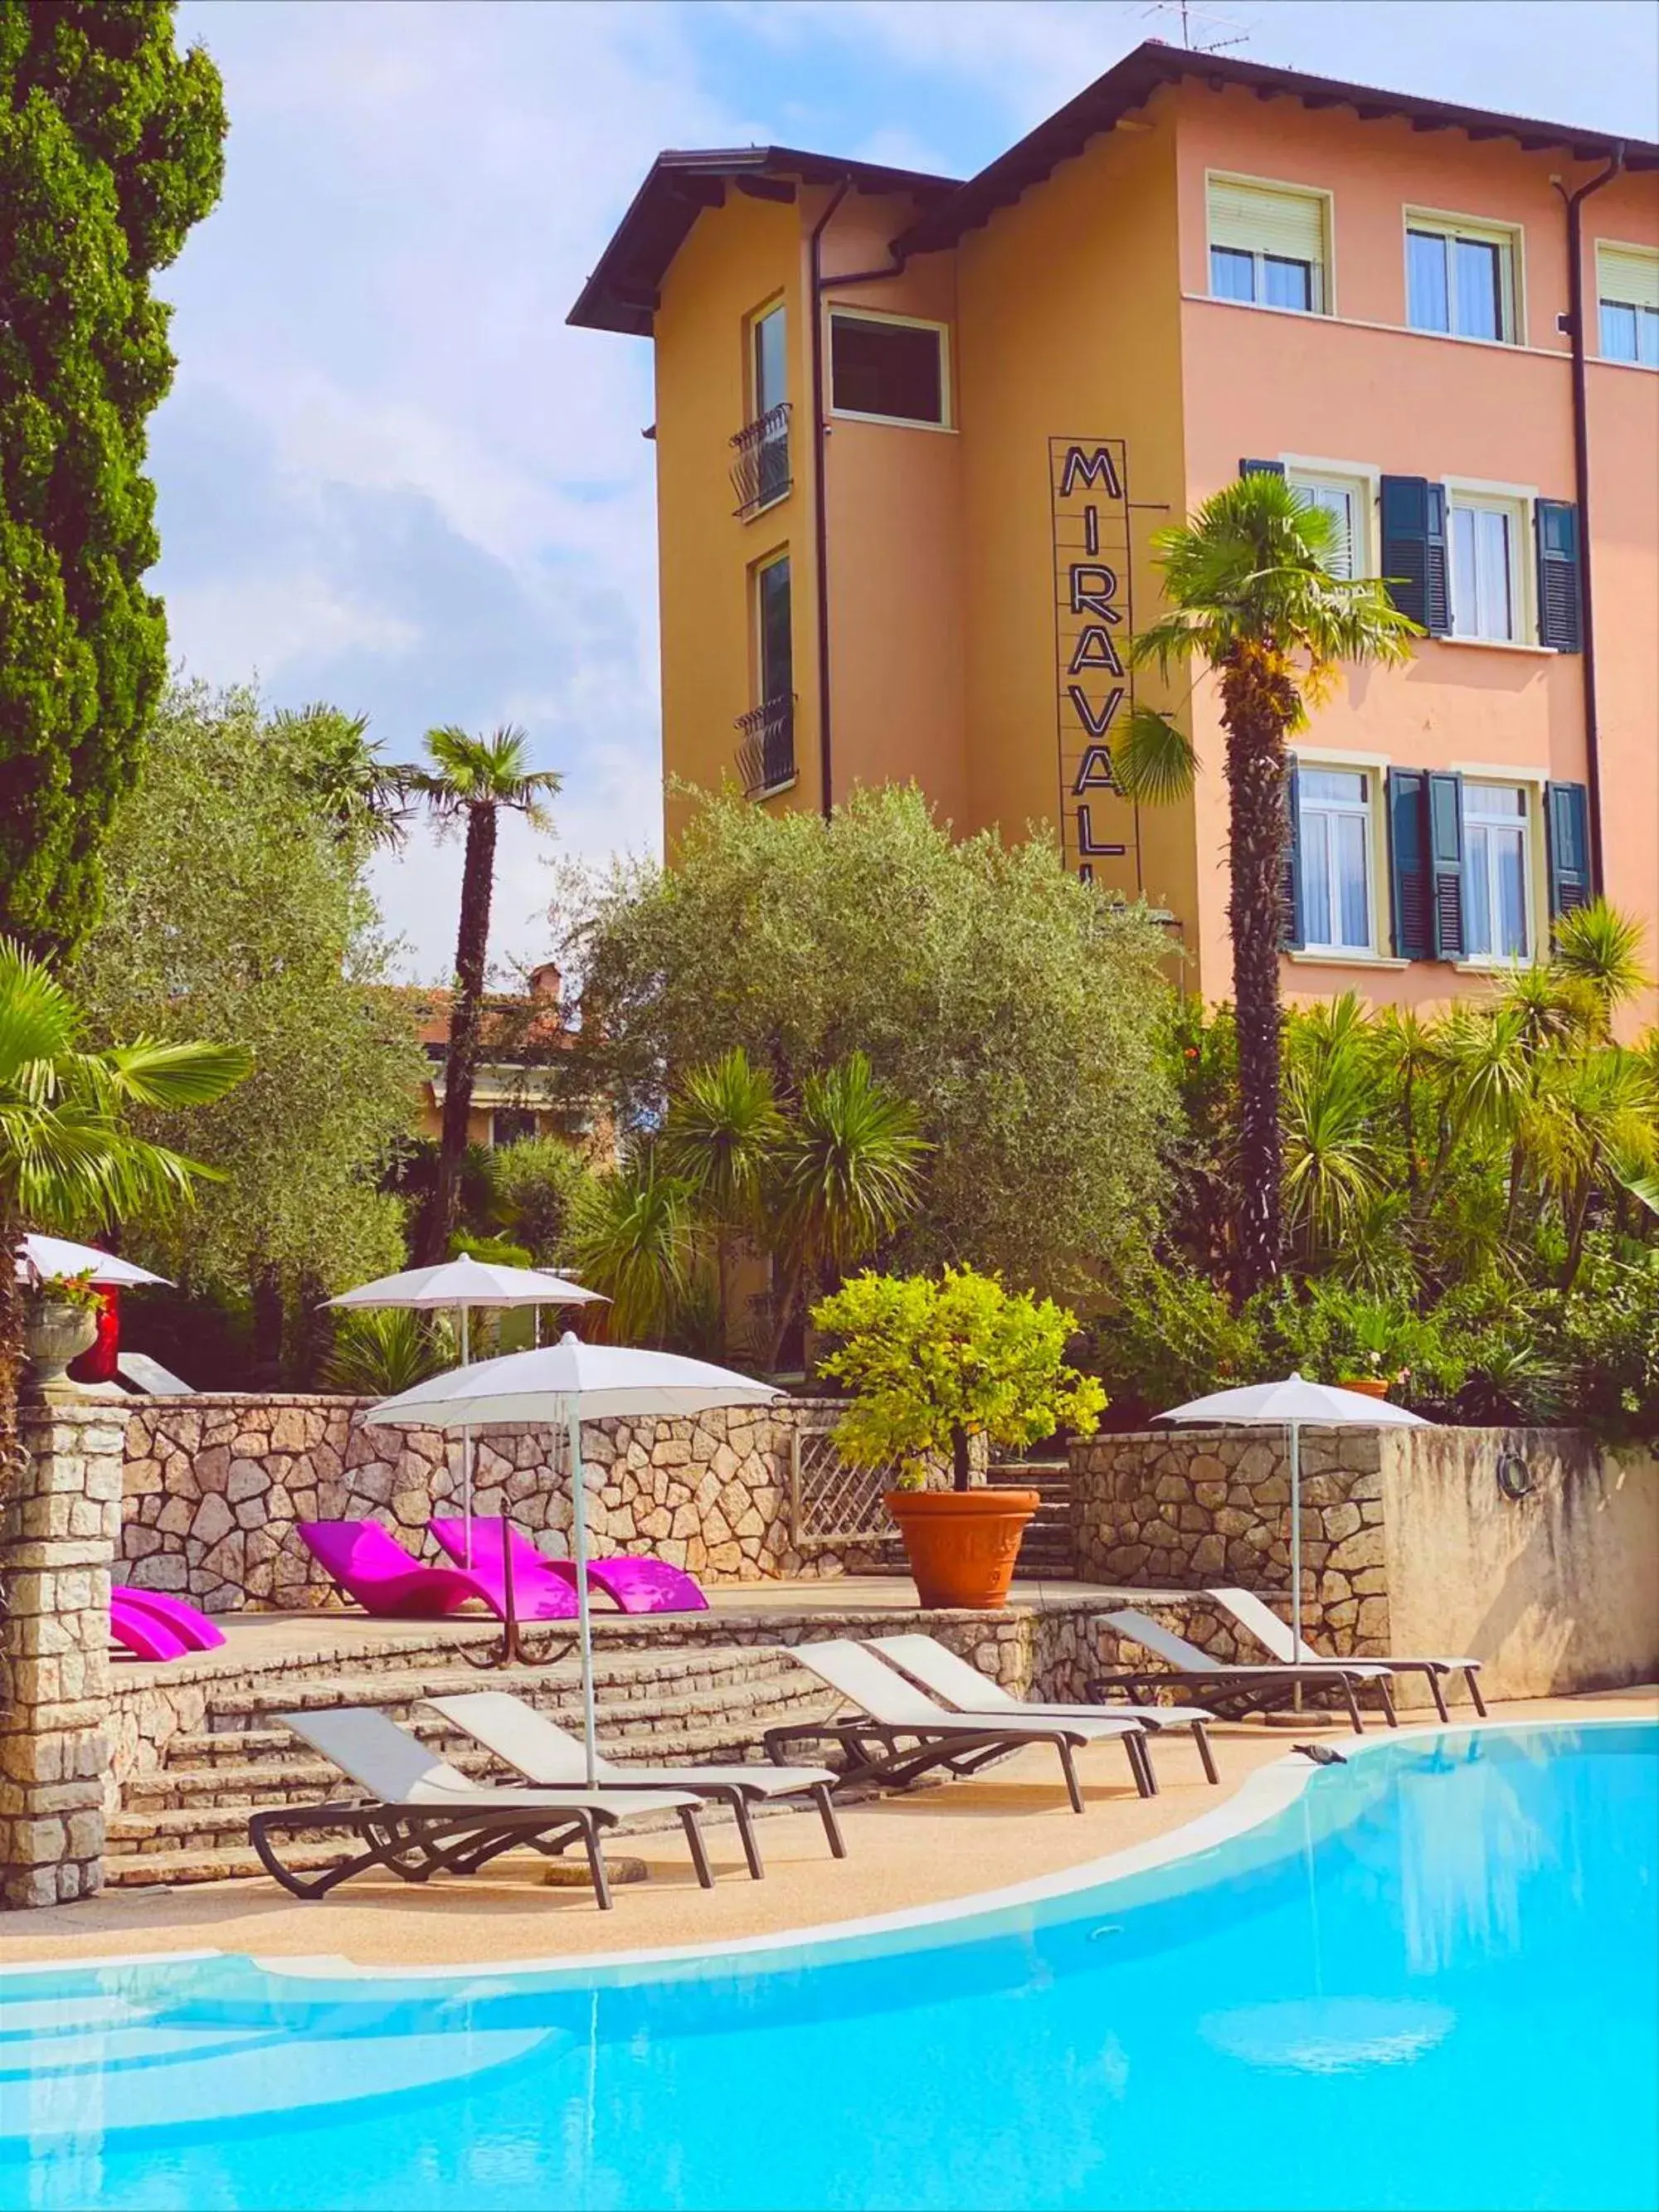 Property building, Swimming Pool in Hotel Villa Miravalle